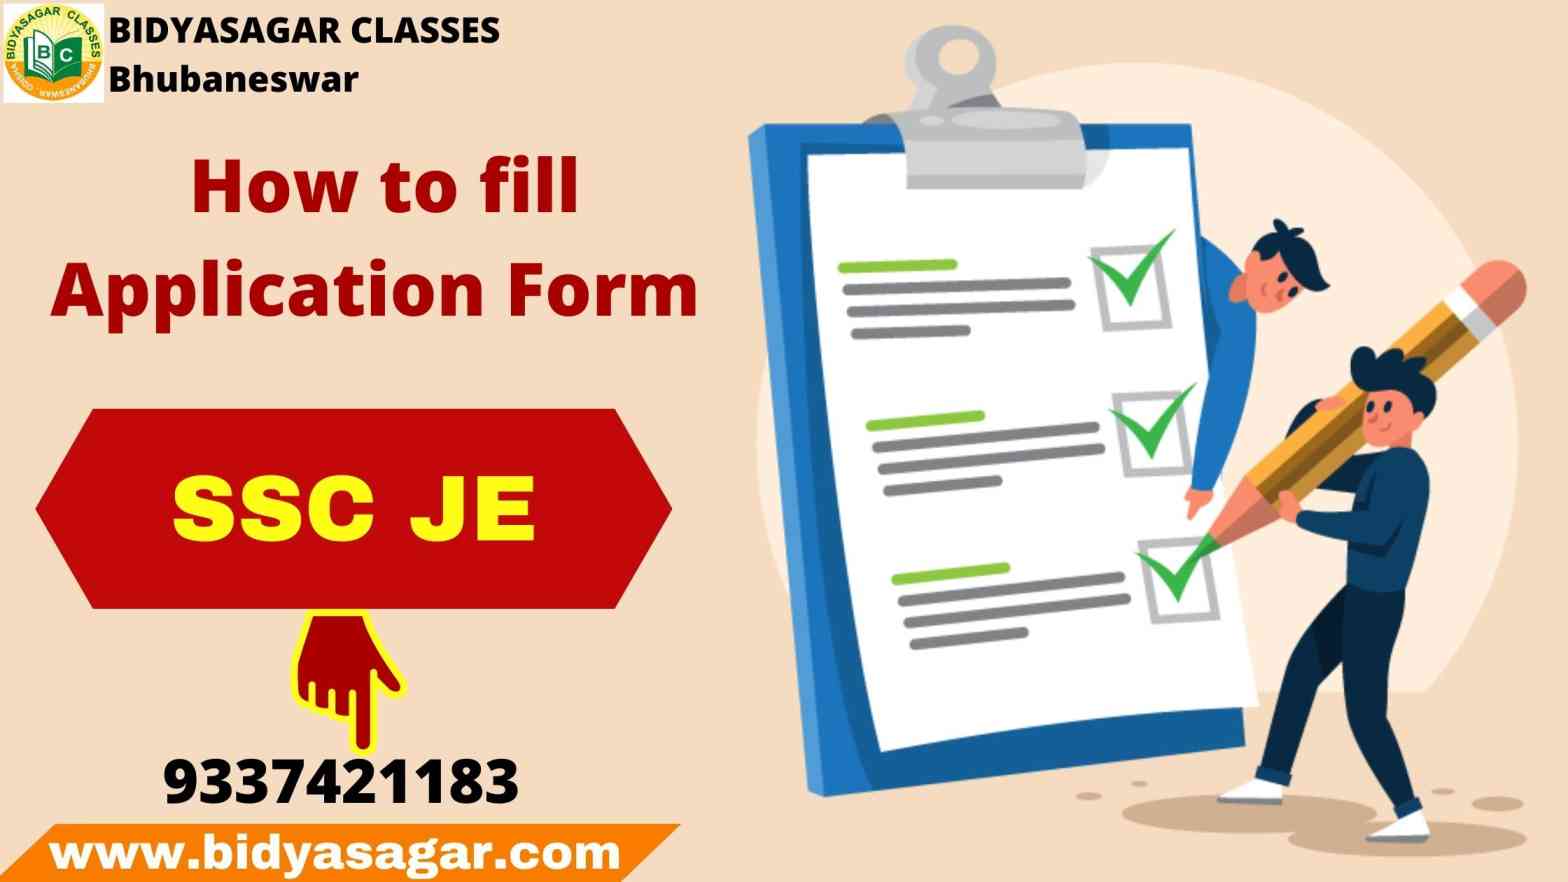 How to Fill SSC JE Application Form 2020-21?